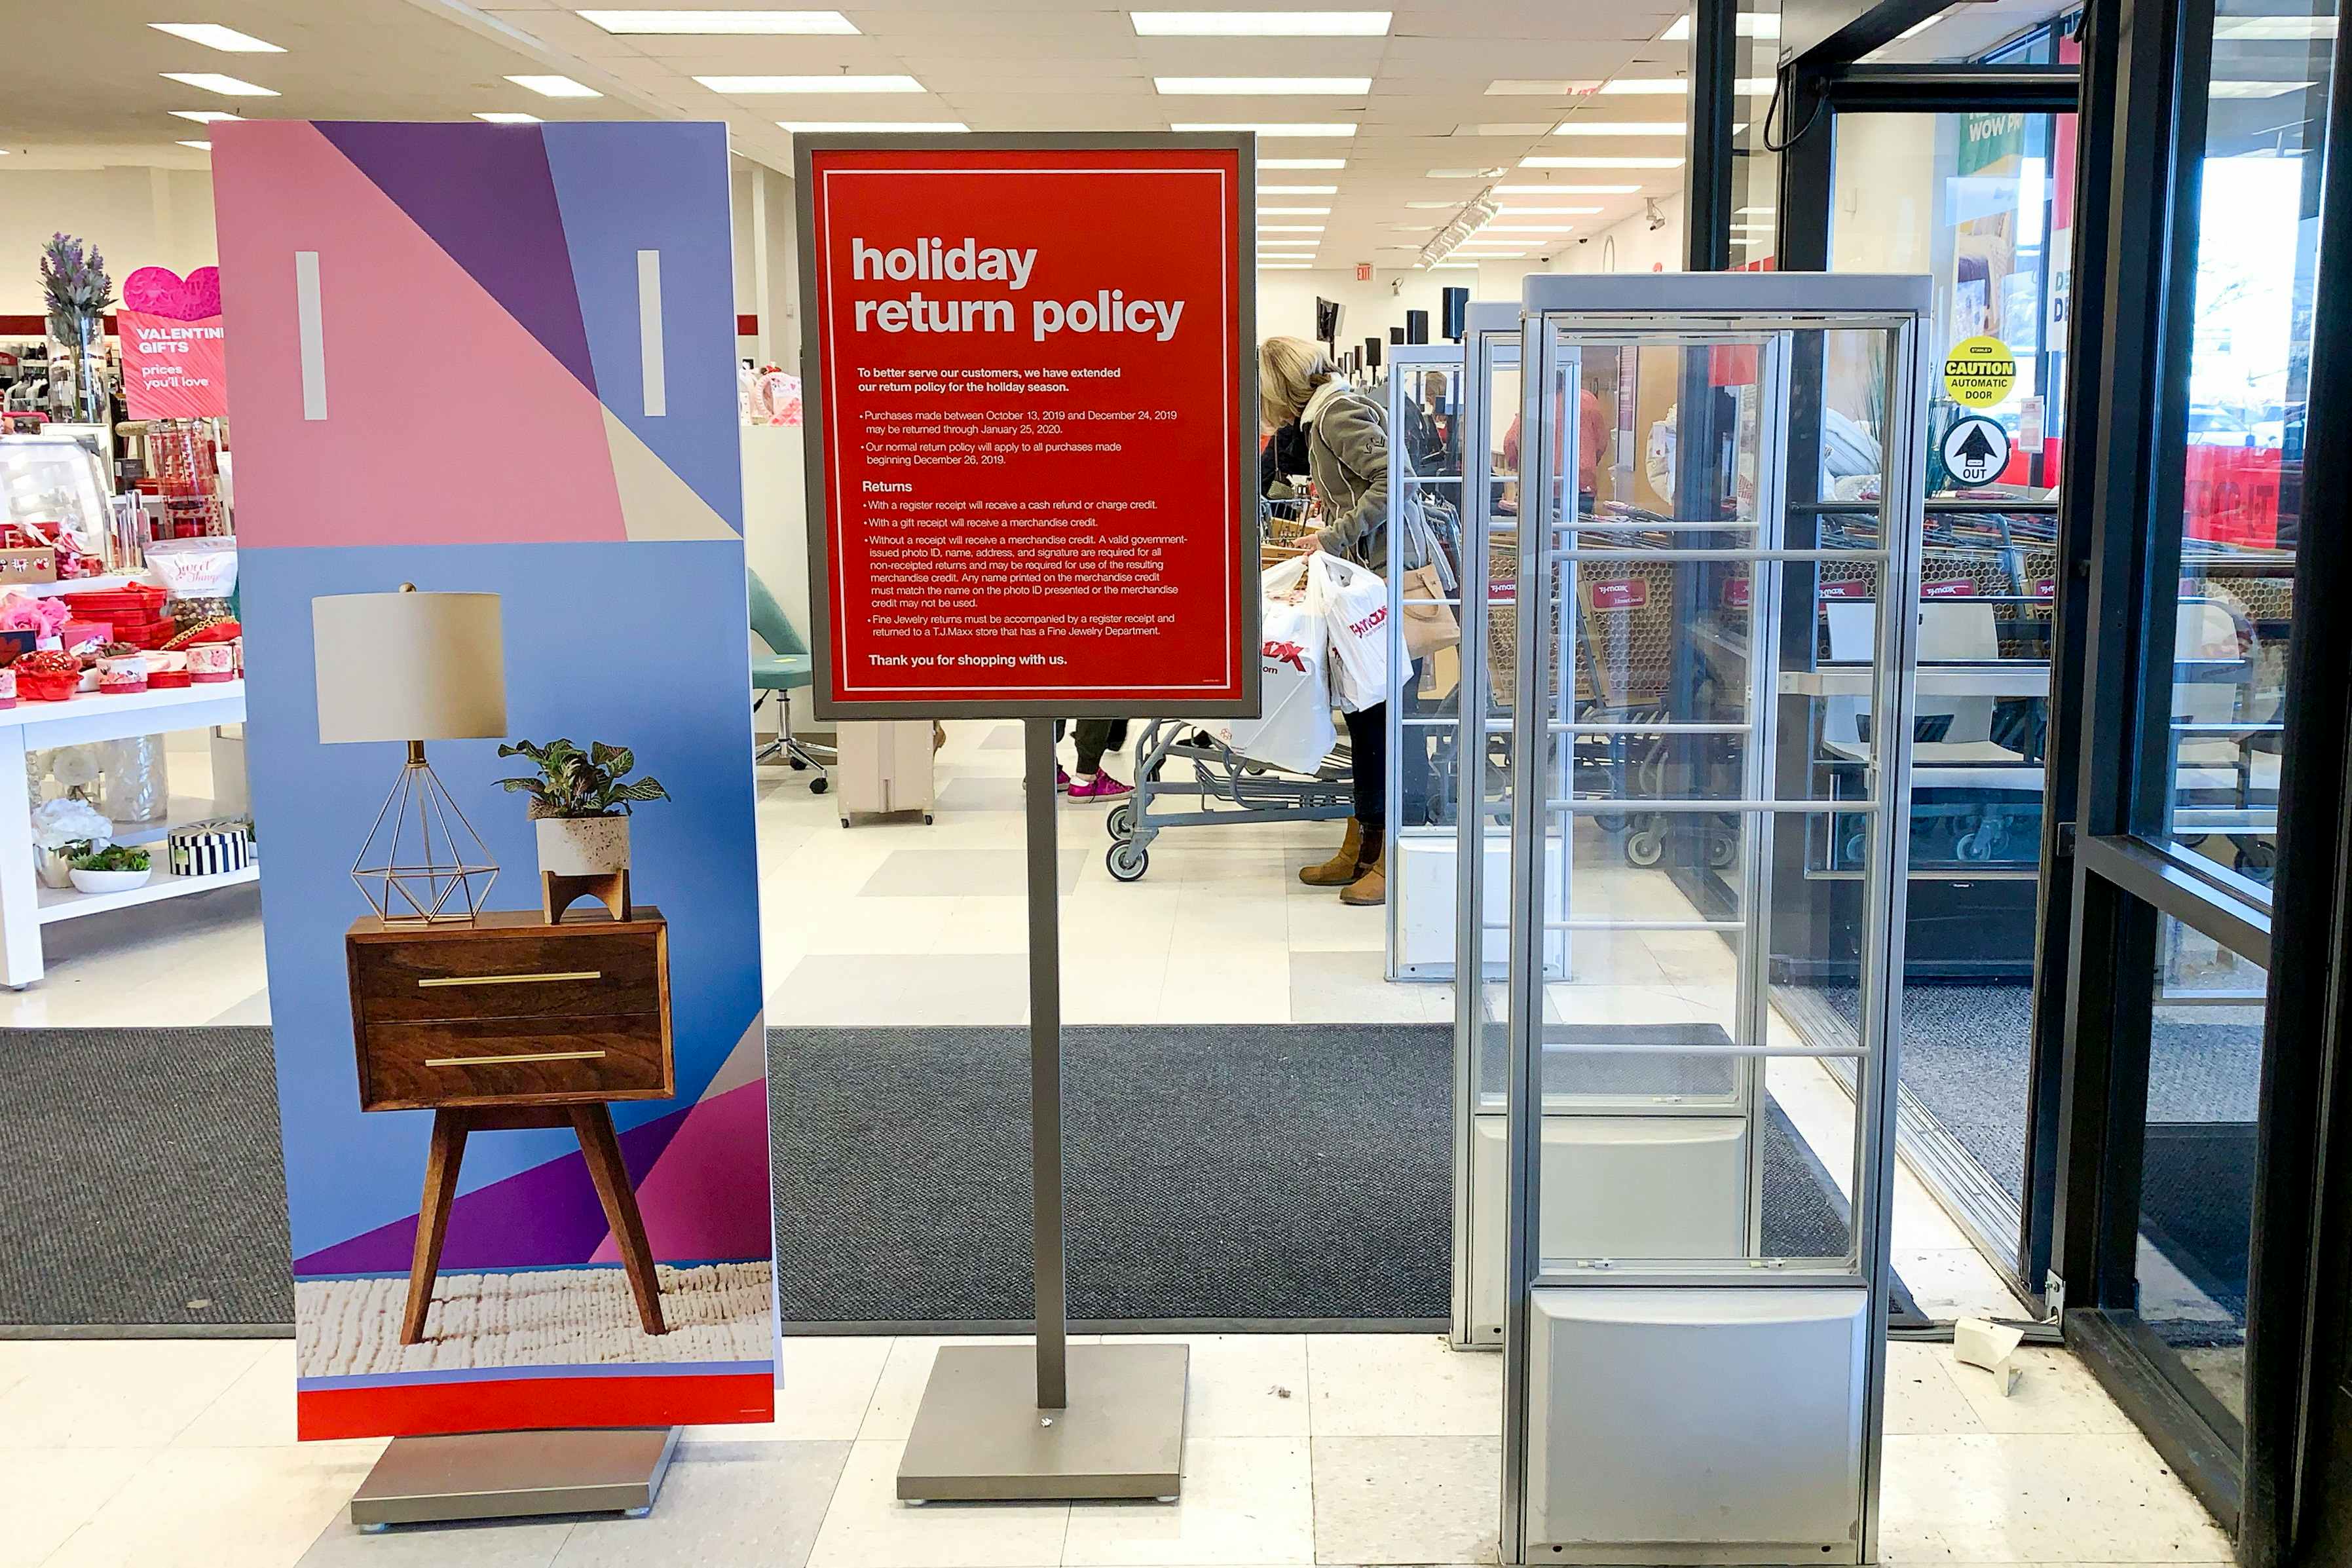 The holiday return policy sign at the front entrance.